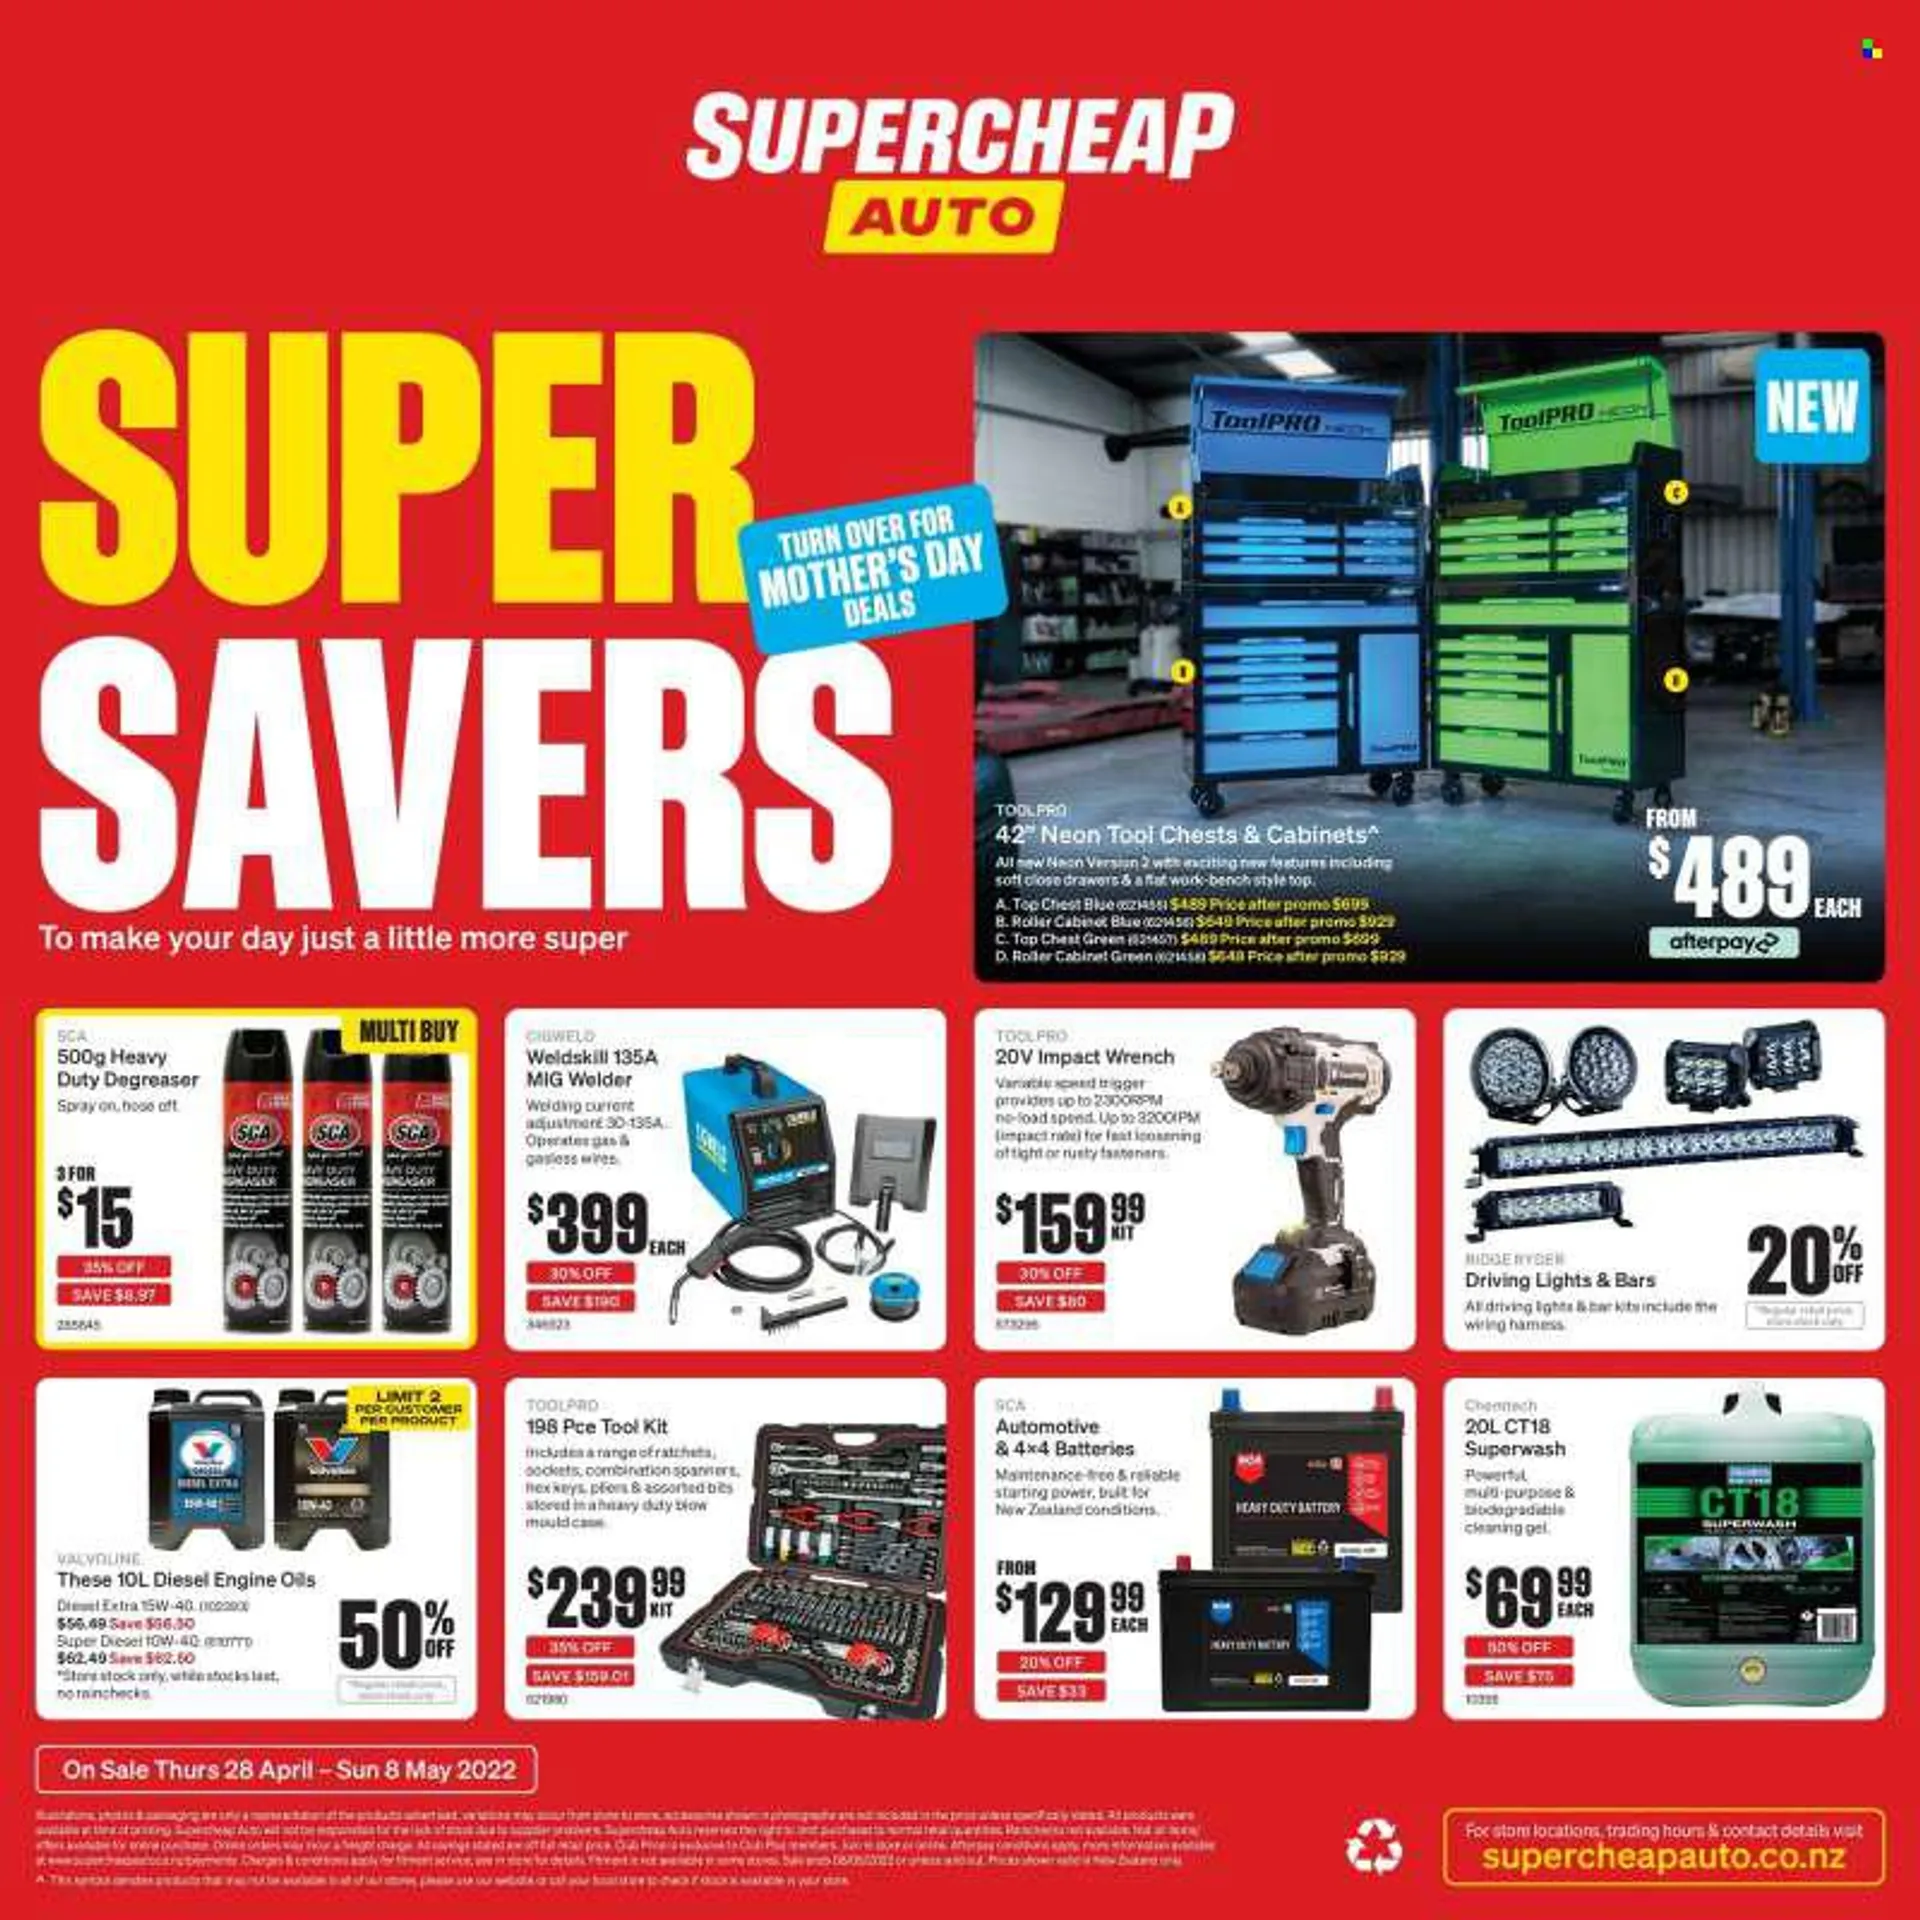 SuperCheap Auto mailer - 28.04.2022 - 08.05.2022. - 28 April 8 May 2022 - Page 18